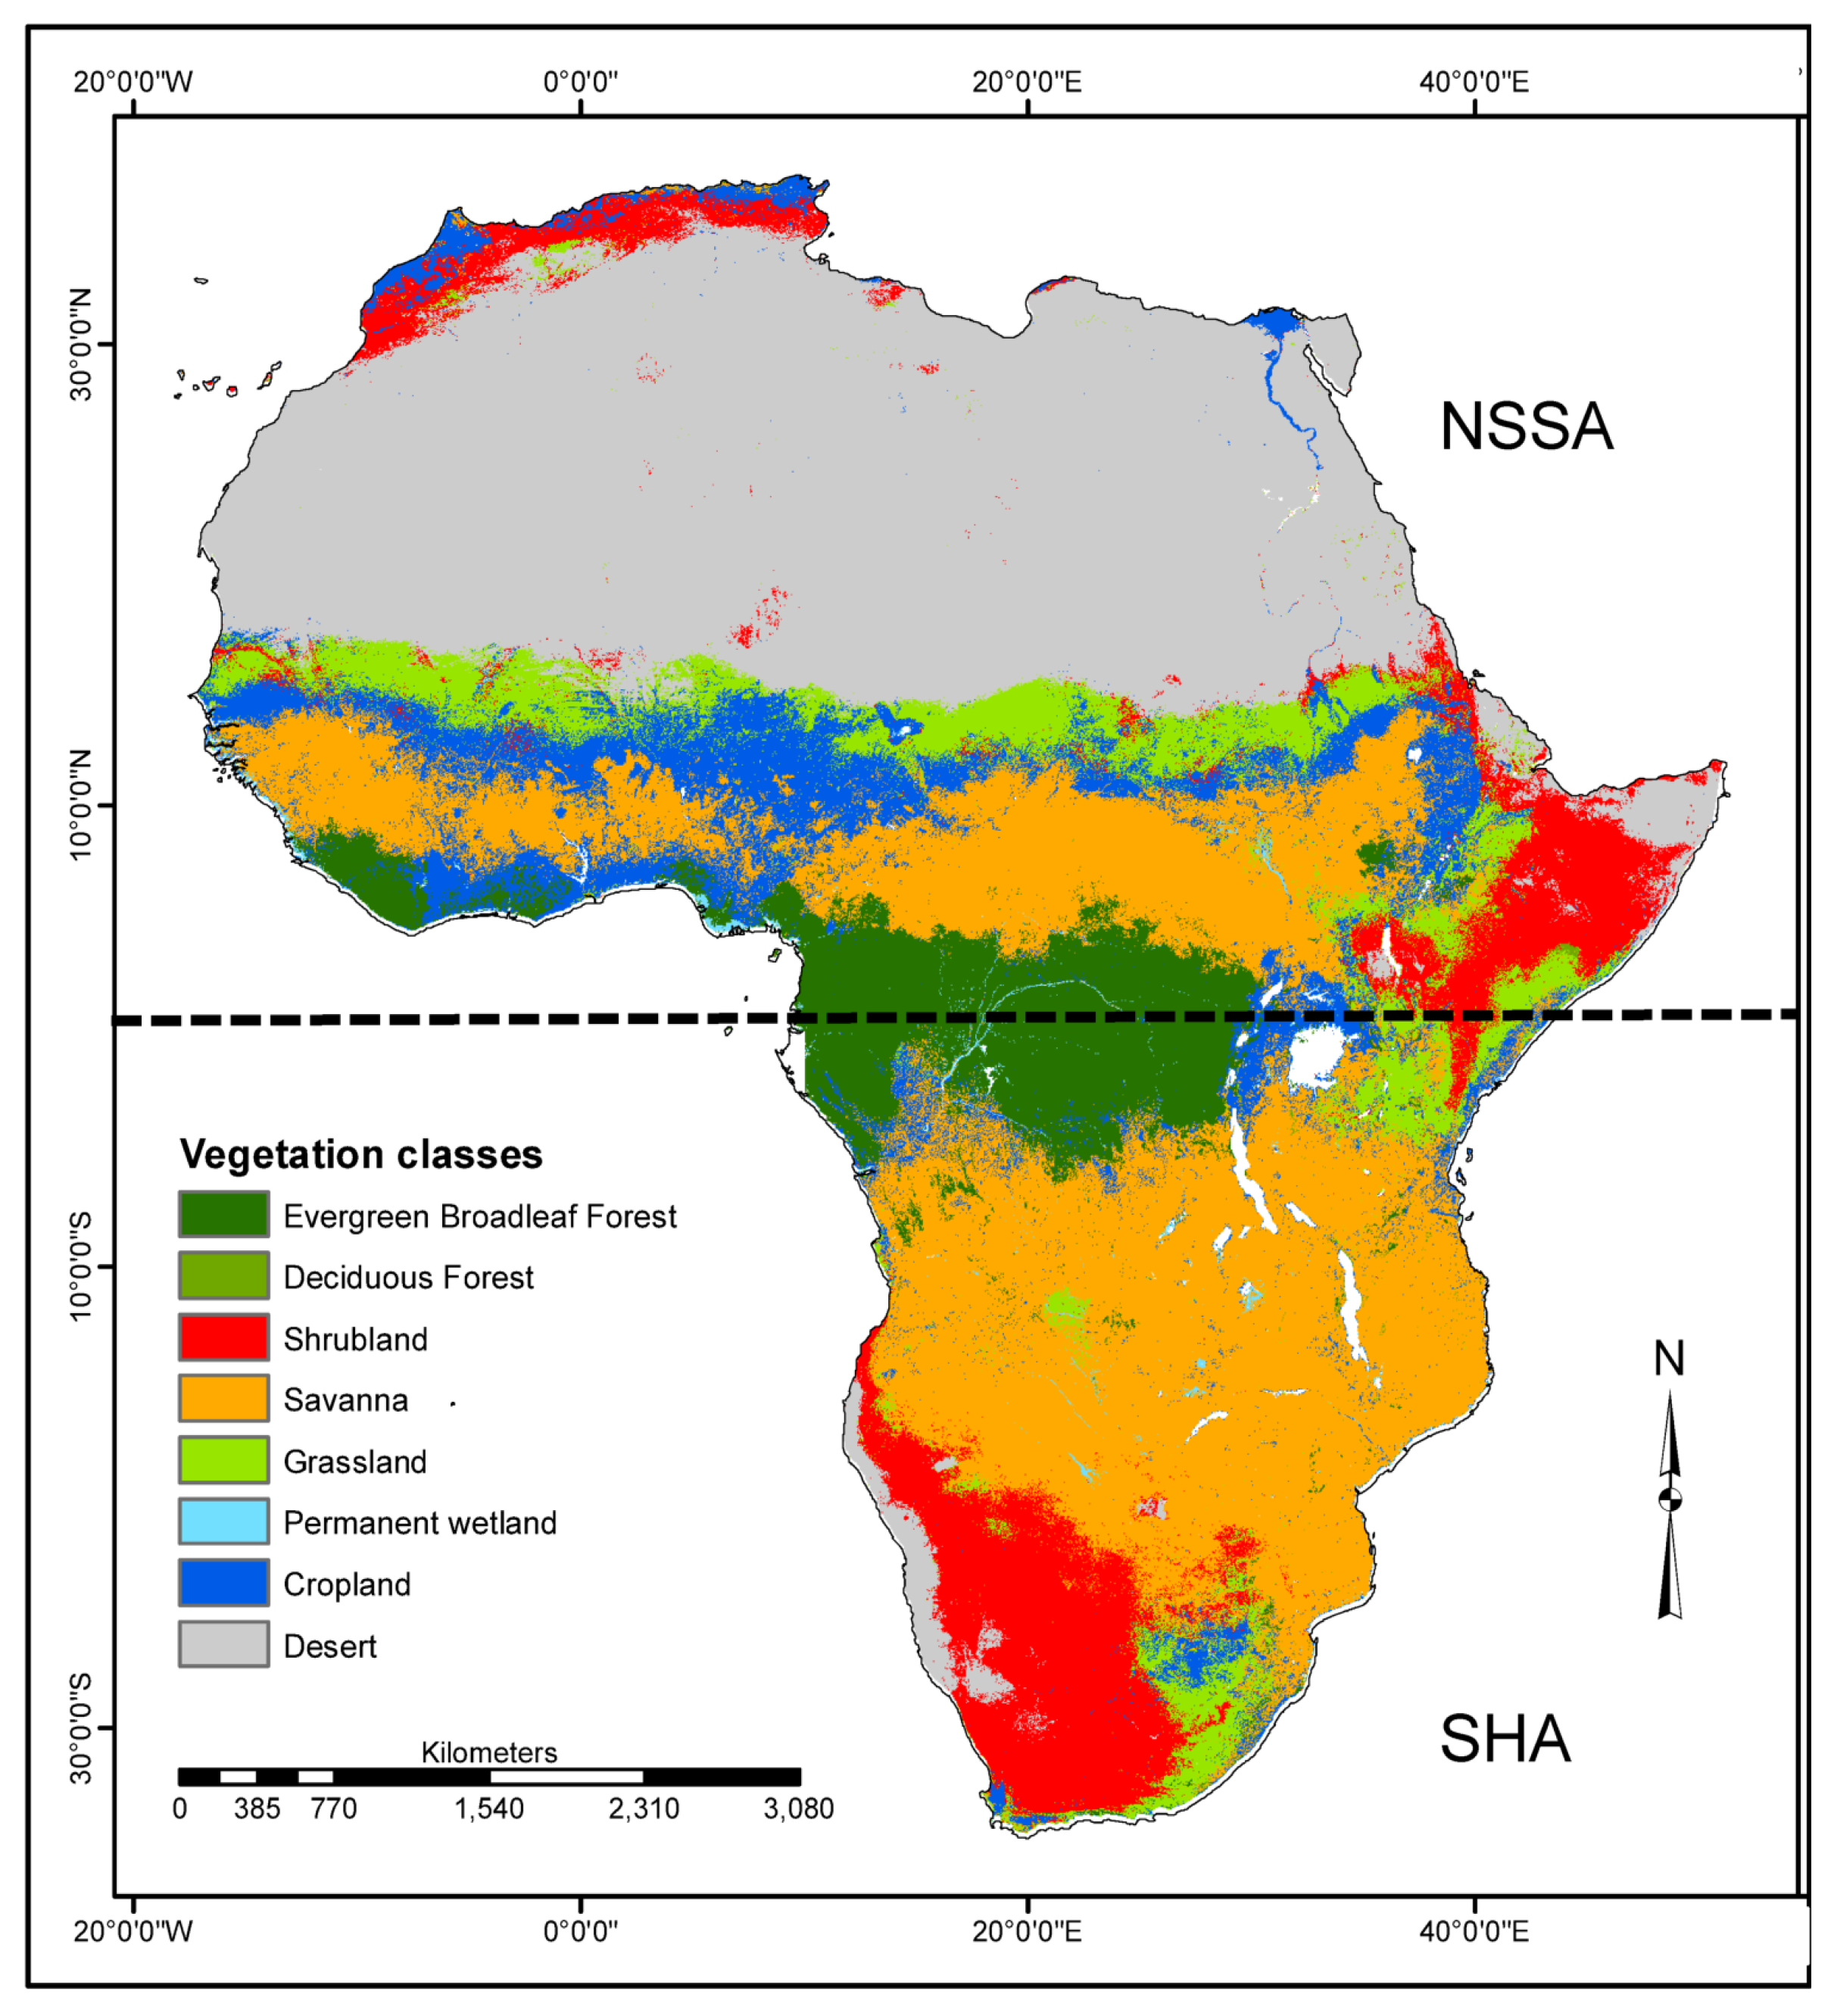 Fire | Free Full-Text | Cyclic Trends of Wildfires over Sub-Saharan Africa